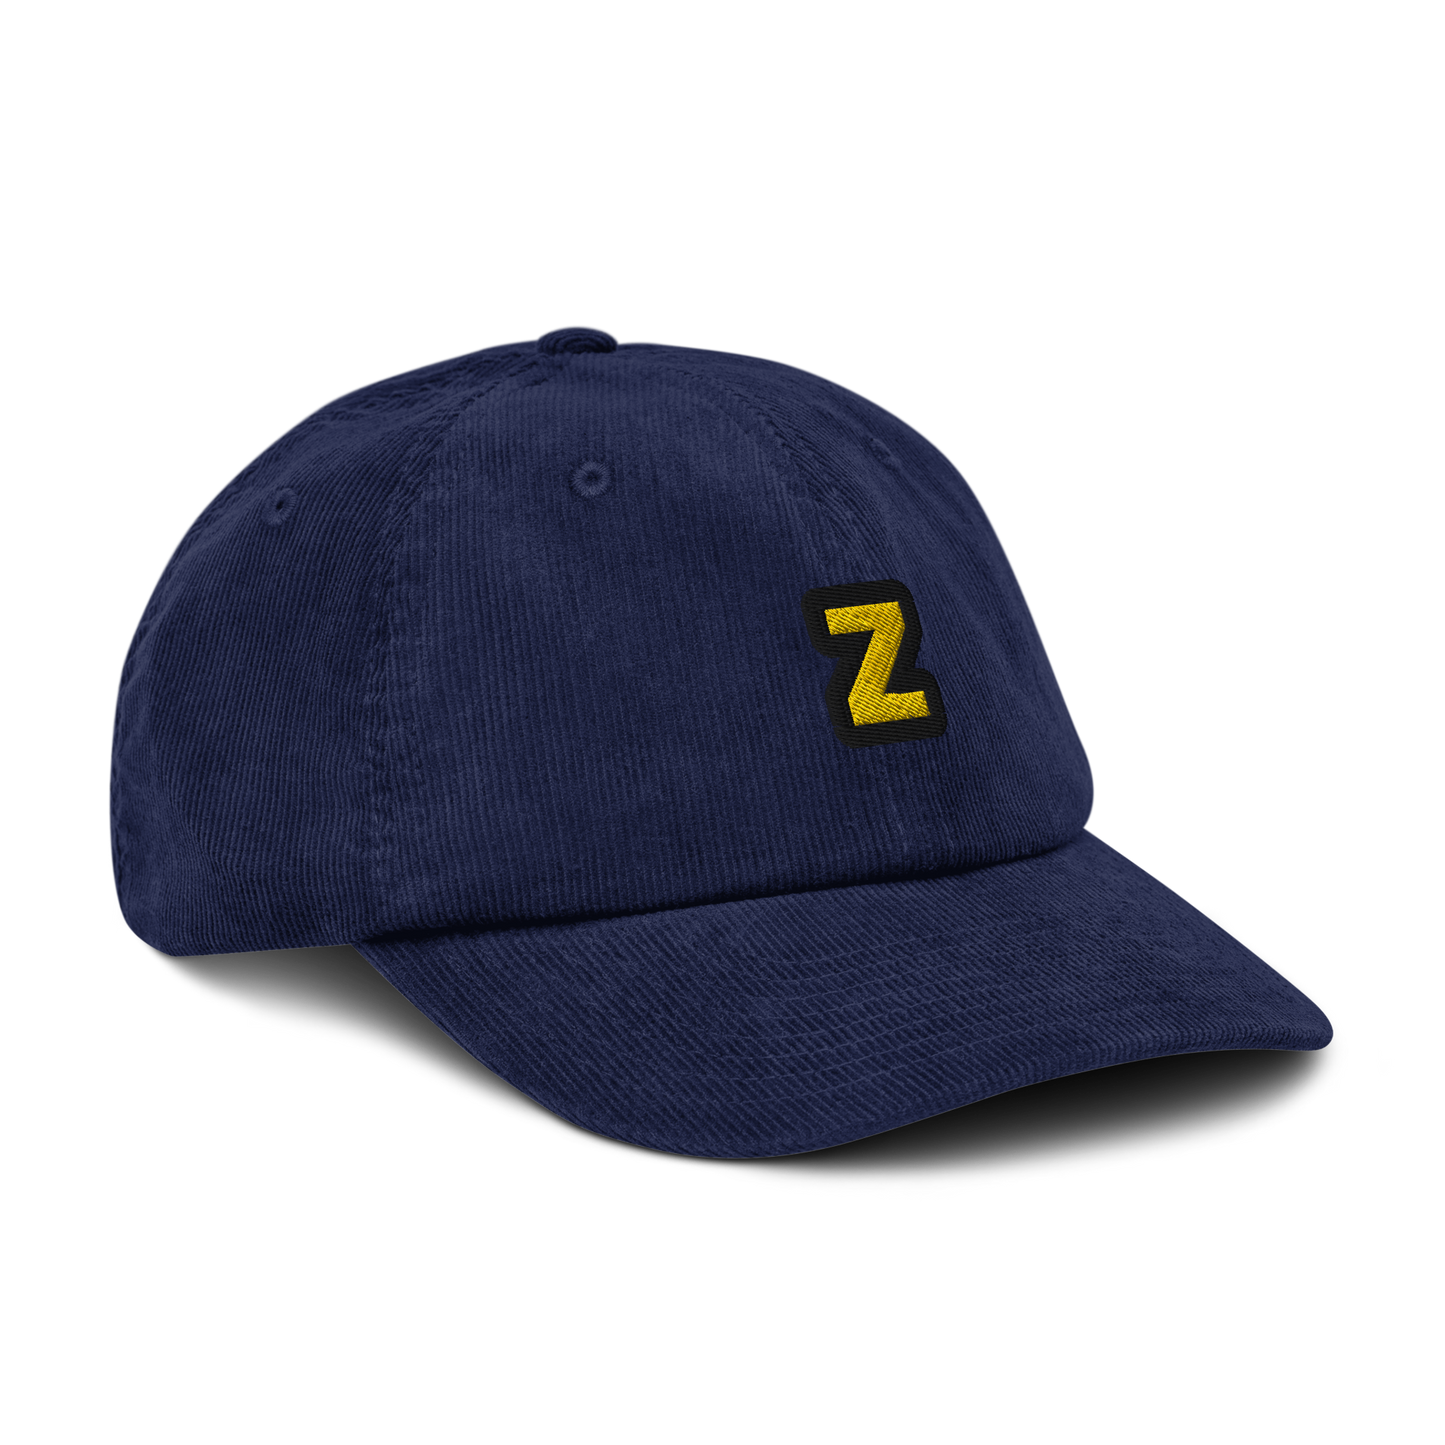 Z - The letter collection - Corduroy hat